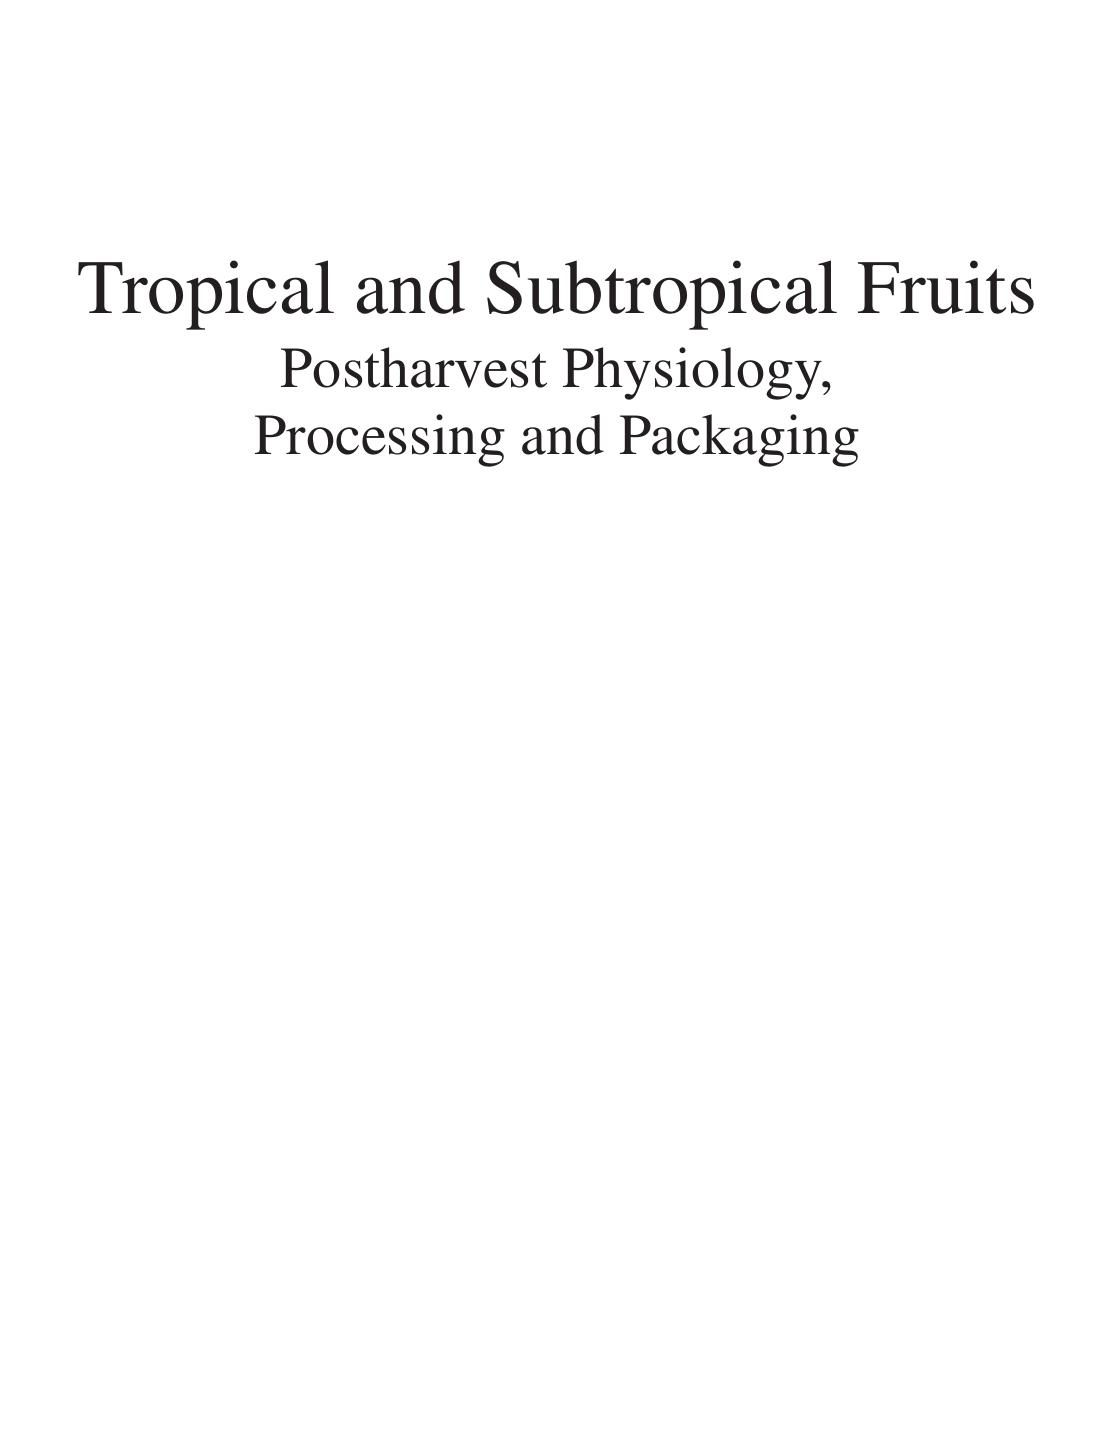 Tropical and Subtropical Fruits  Postharvest Physiology, Processing and Packaging ( PDFDrive ) (1), 2012